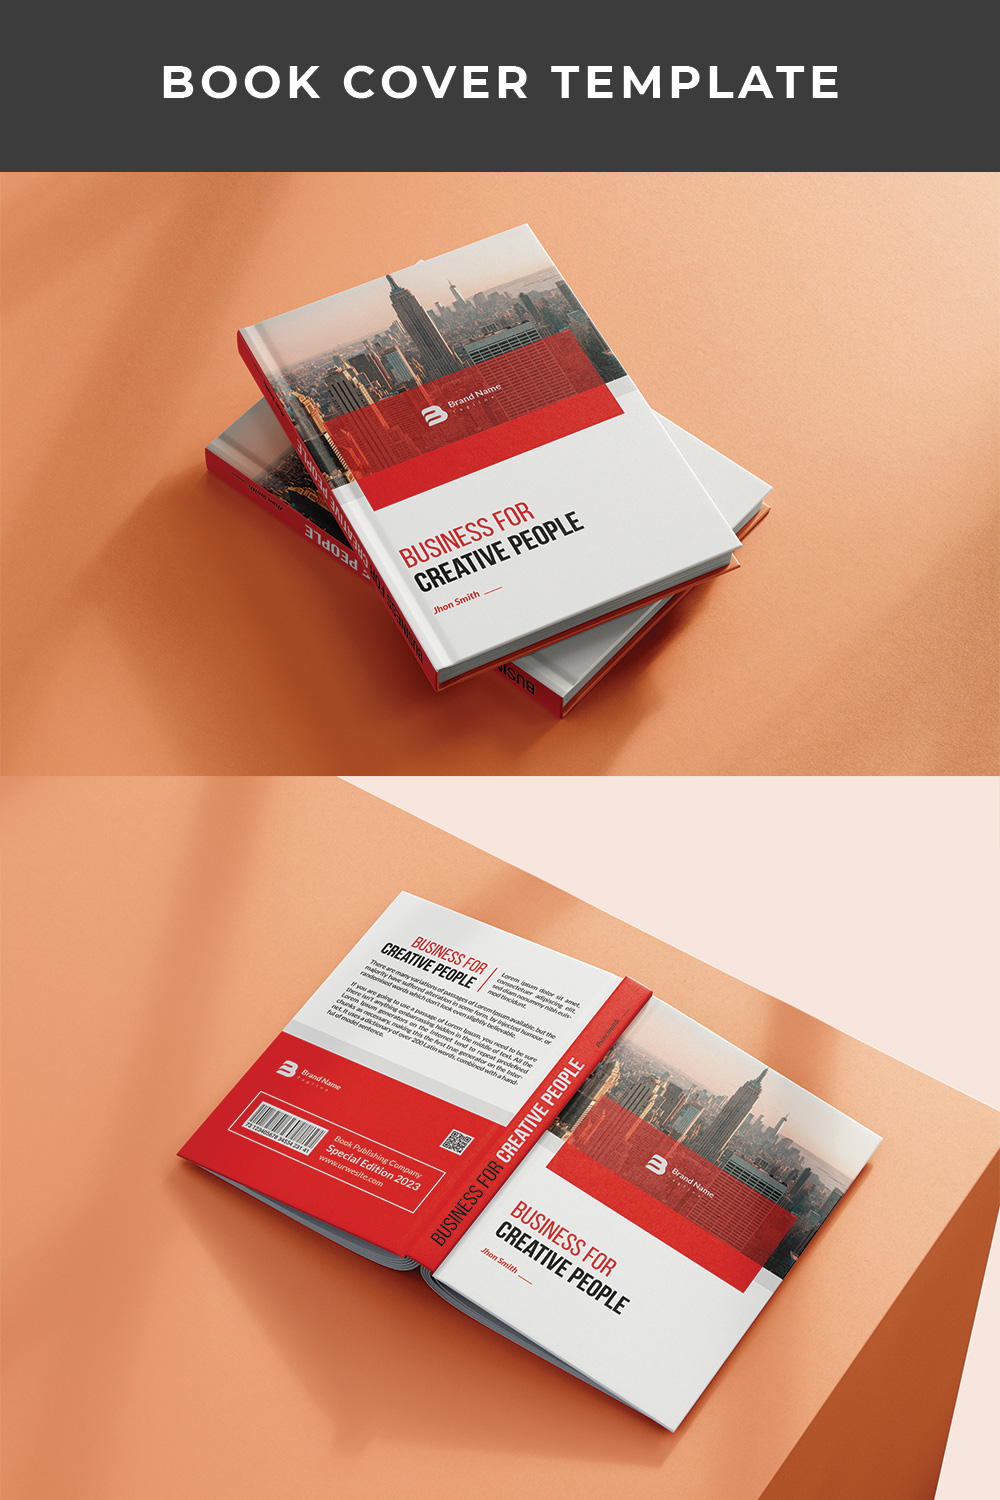 Book cover template - Corporate book cover design pinterest preview image.